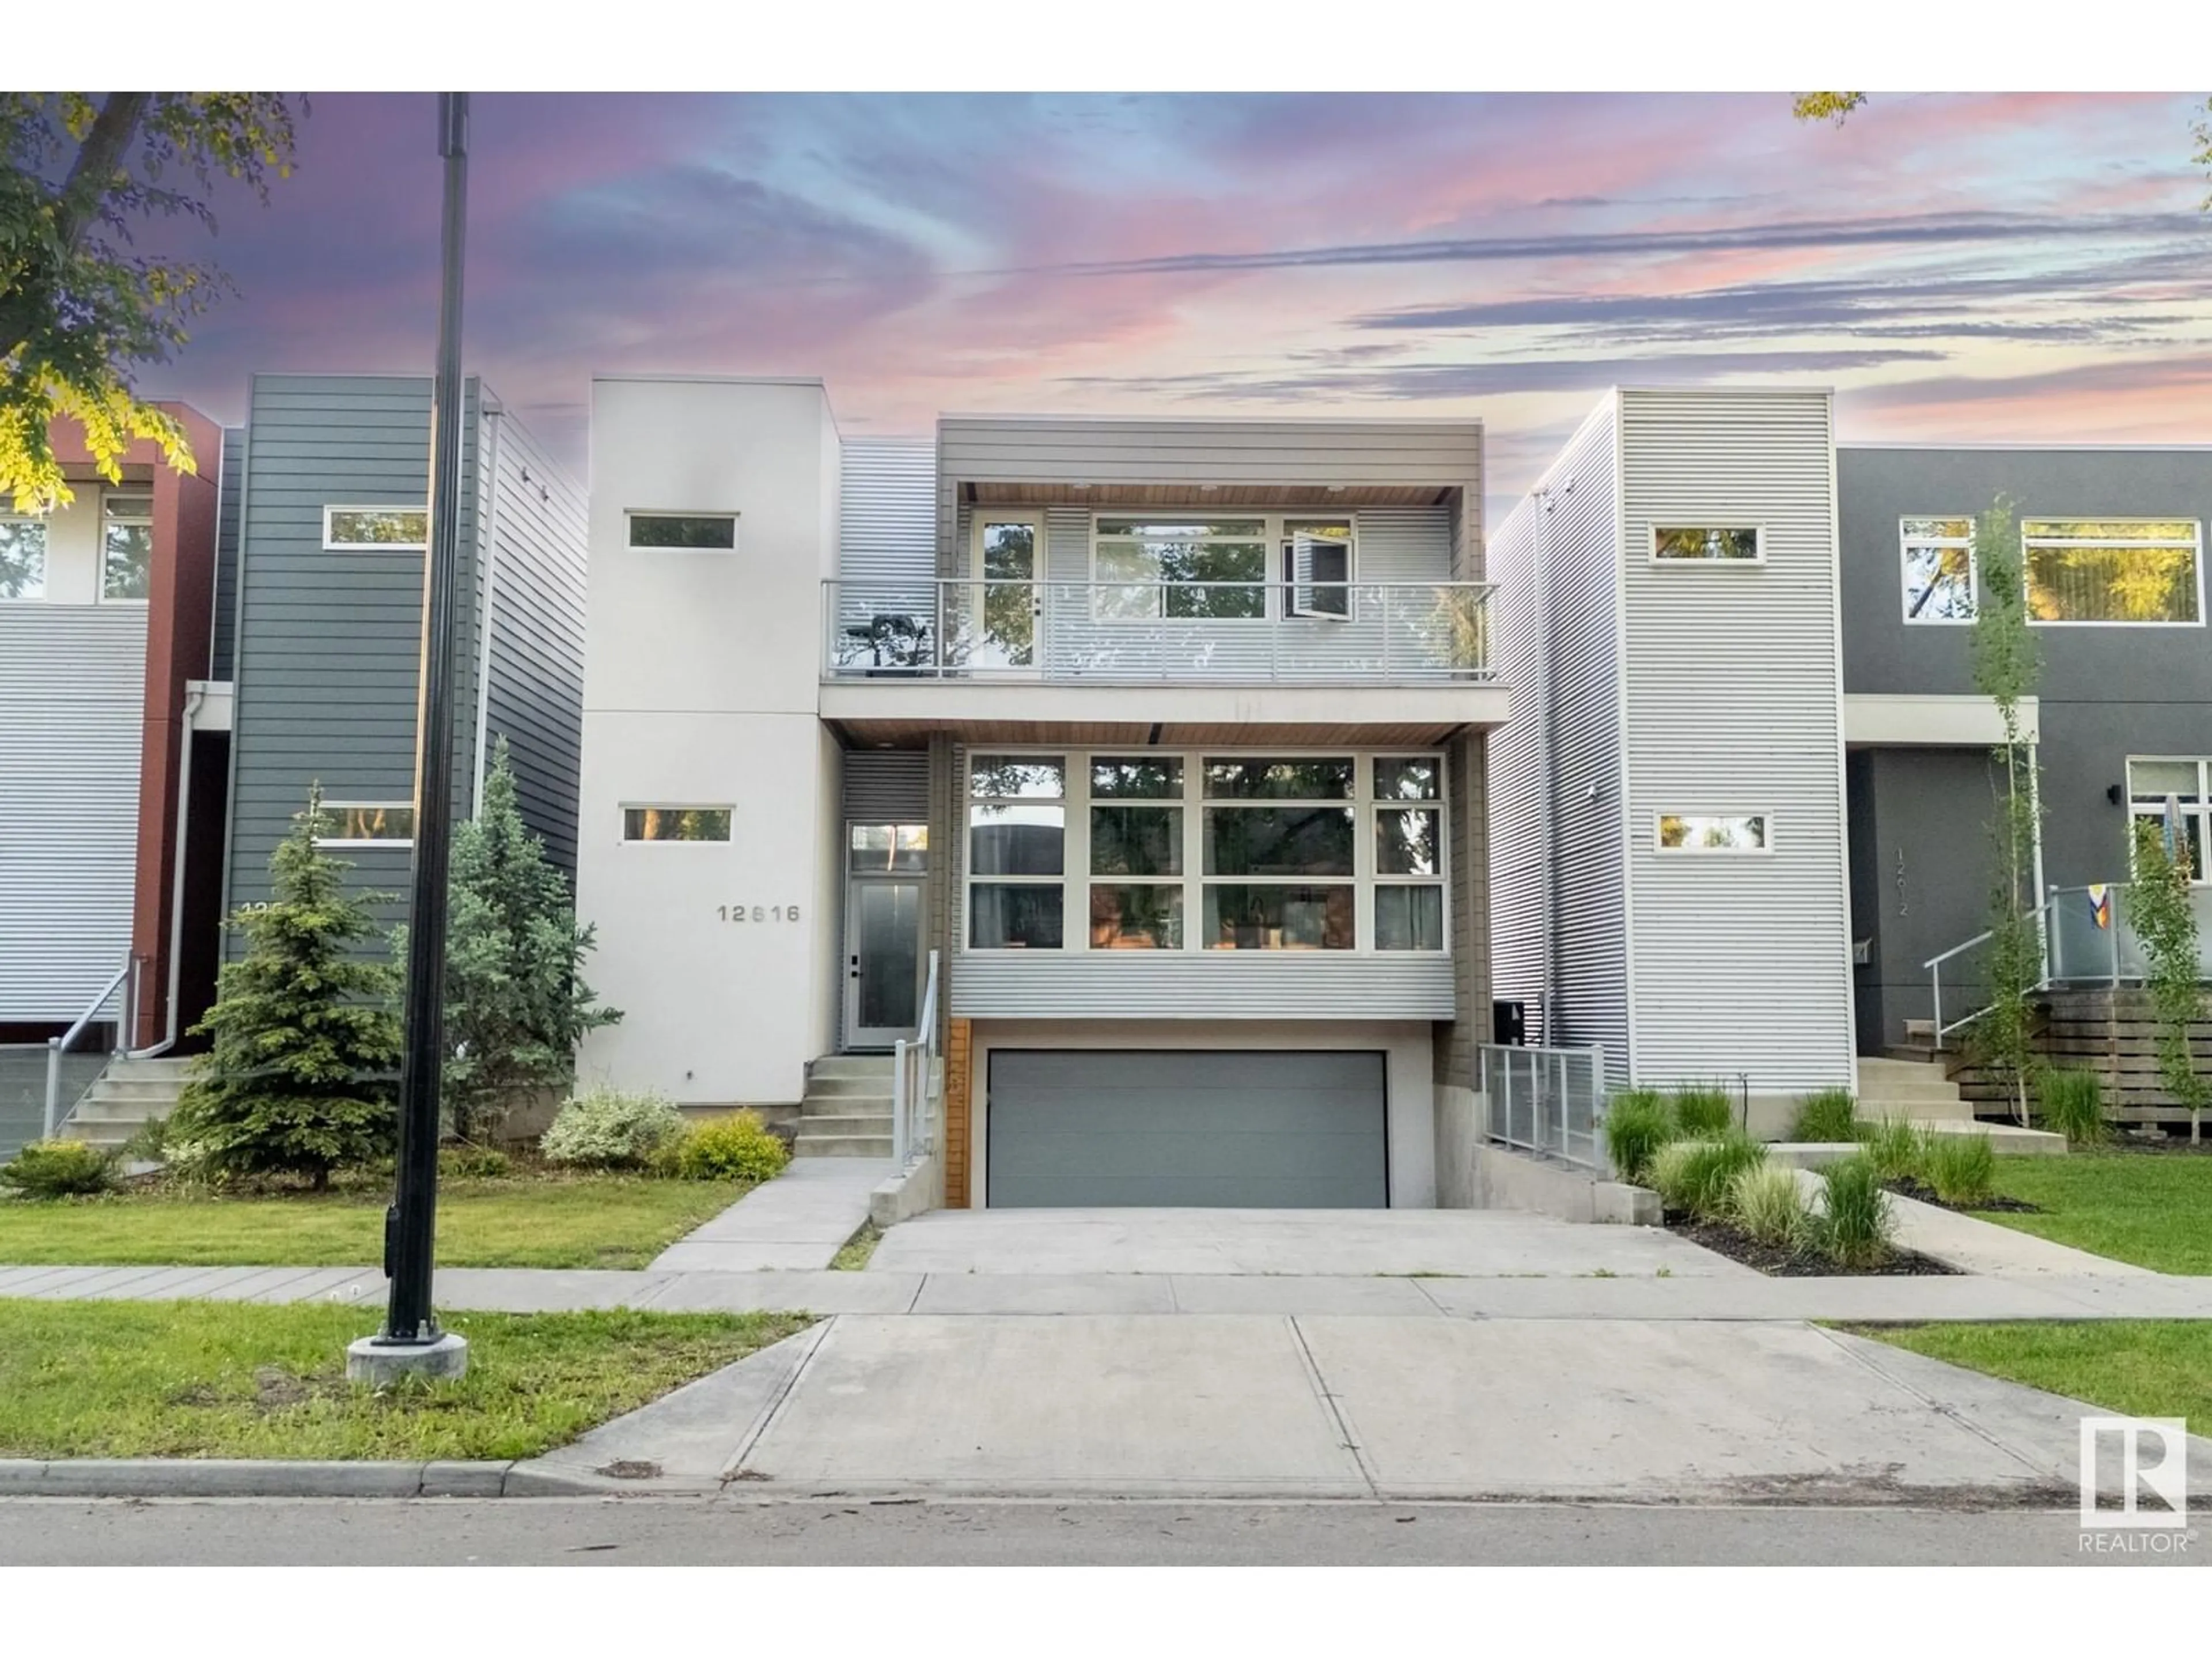 A pic from exterior of the house or condo for 12616 108 AV NW, Edmonton Alberta T5M2B1